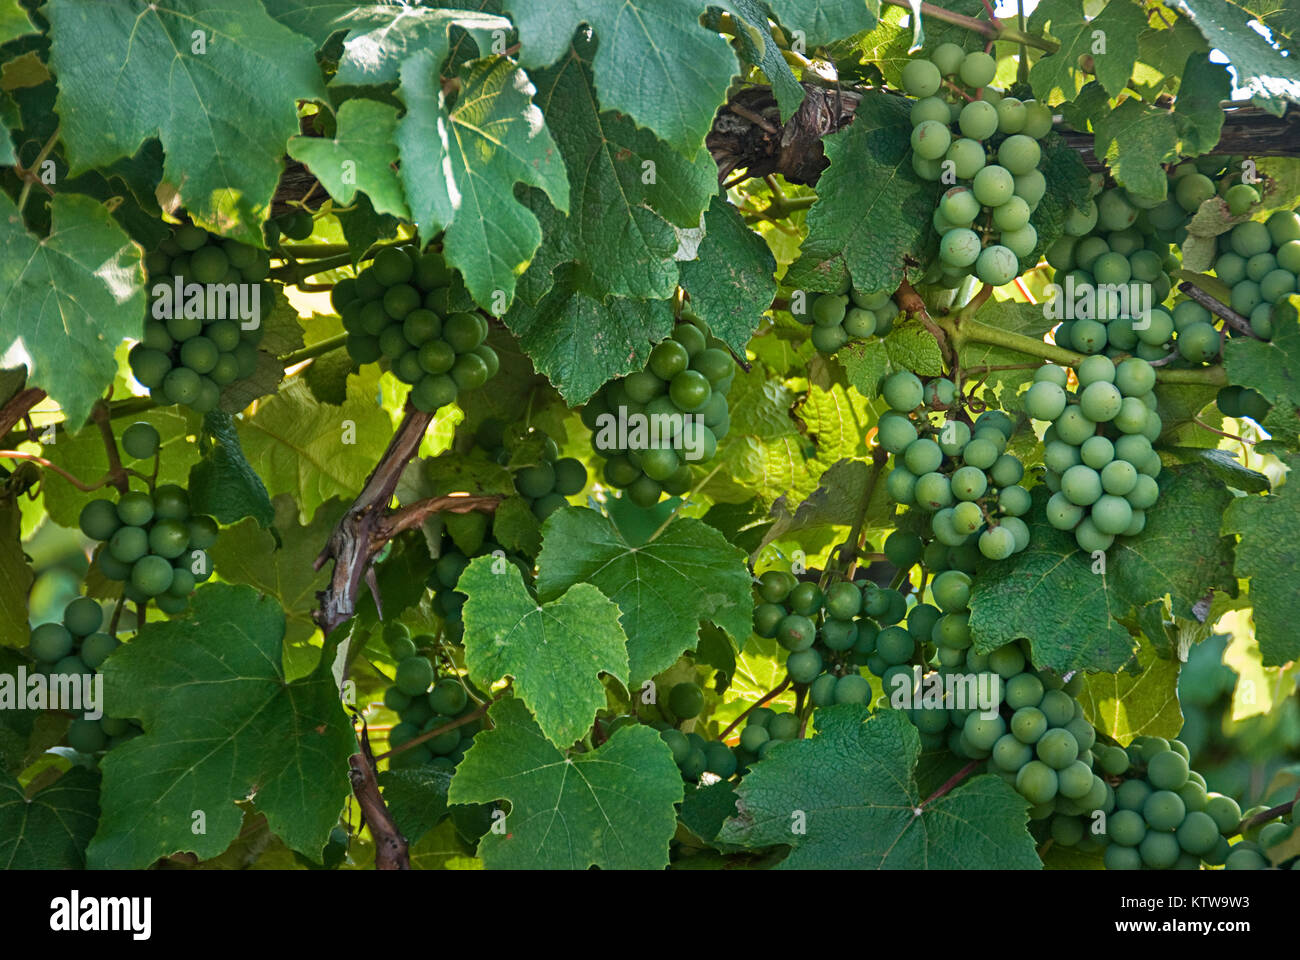 wall of grapes Stock Photo